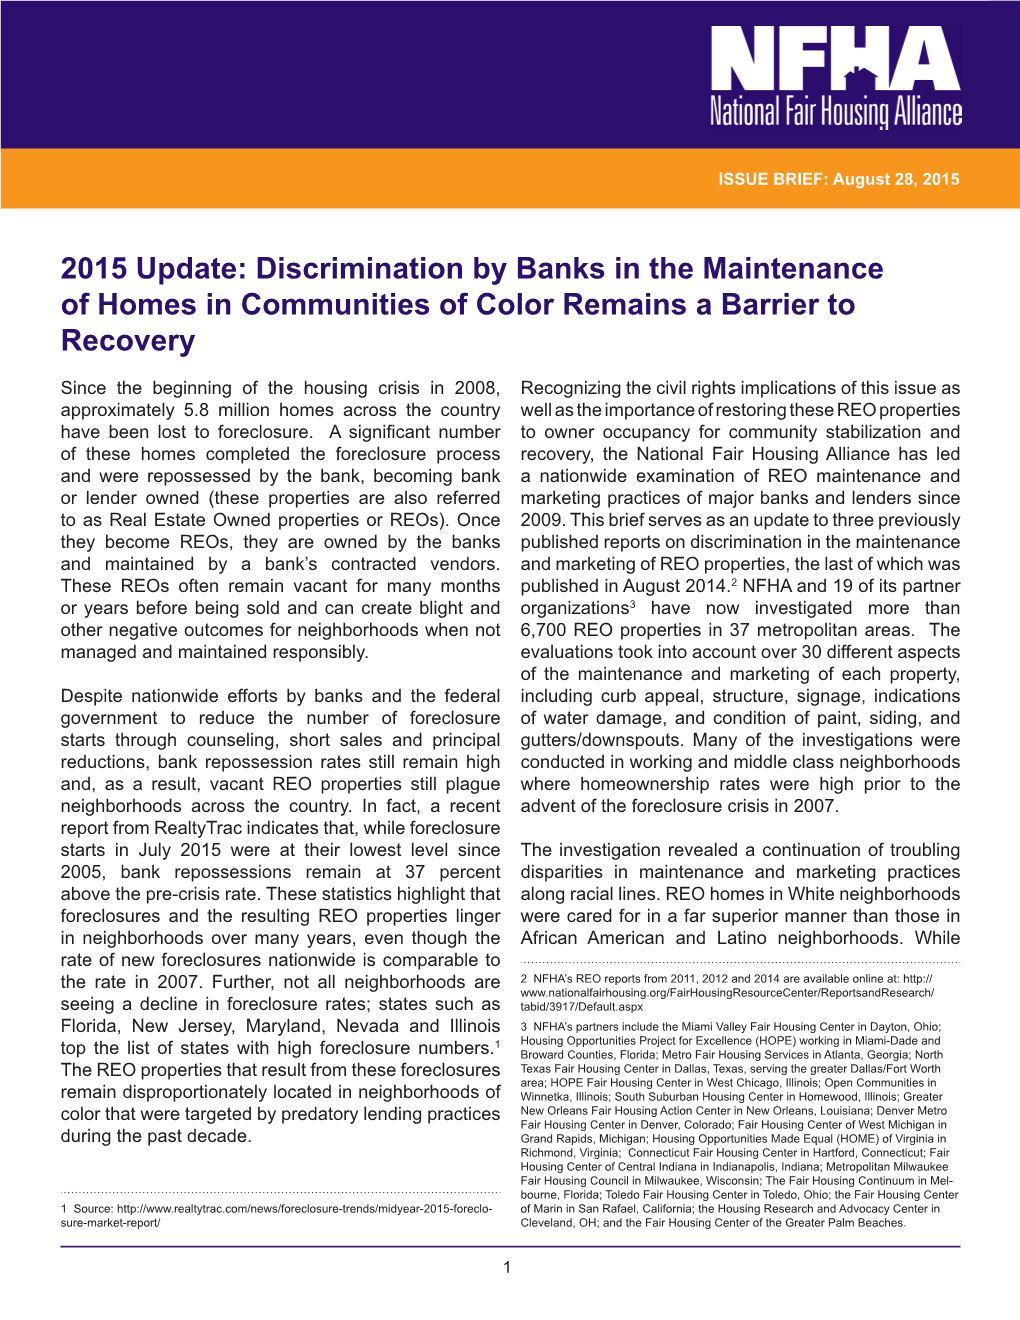 2015 Update: Discrimination by Banks in the Maintenance of Homes in Communities of Color Remains a Barrier to Recovery